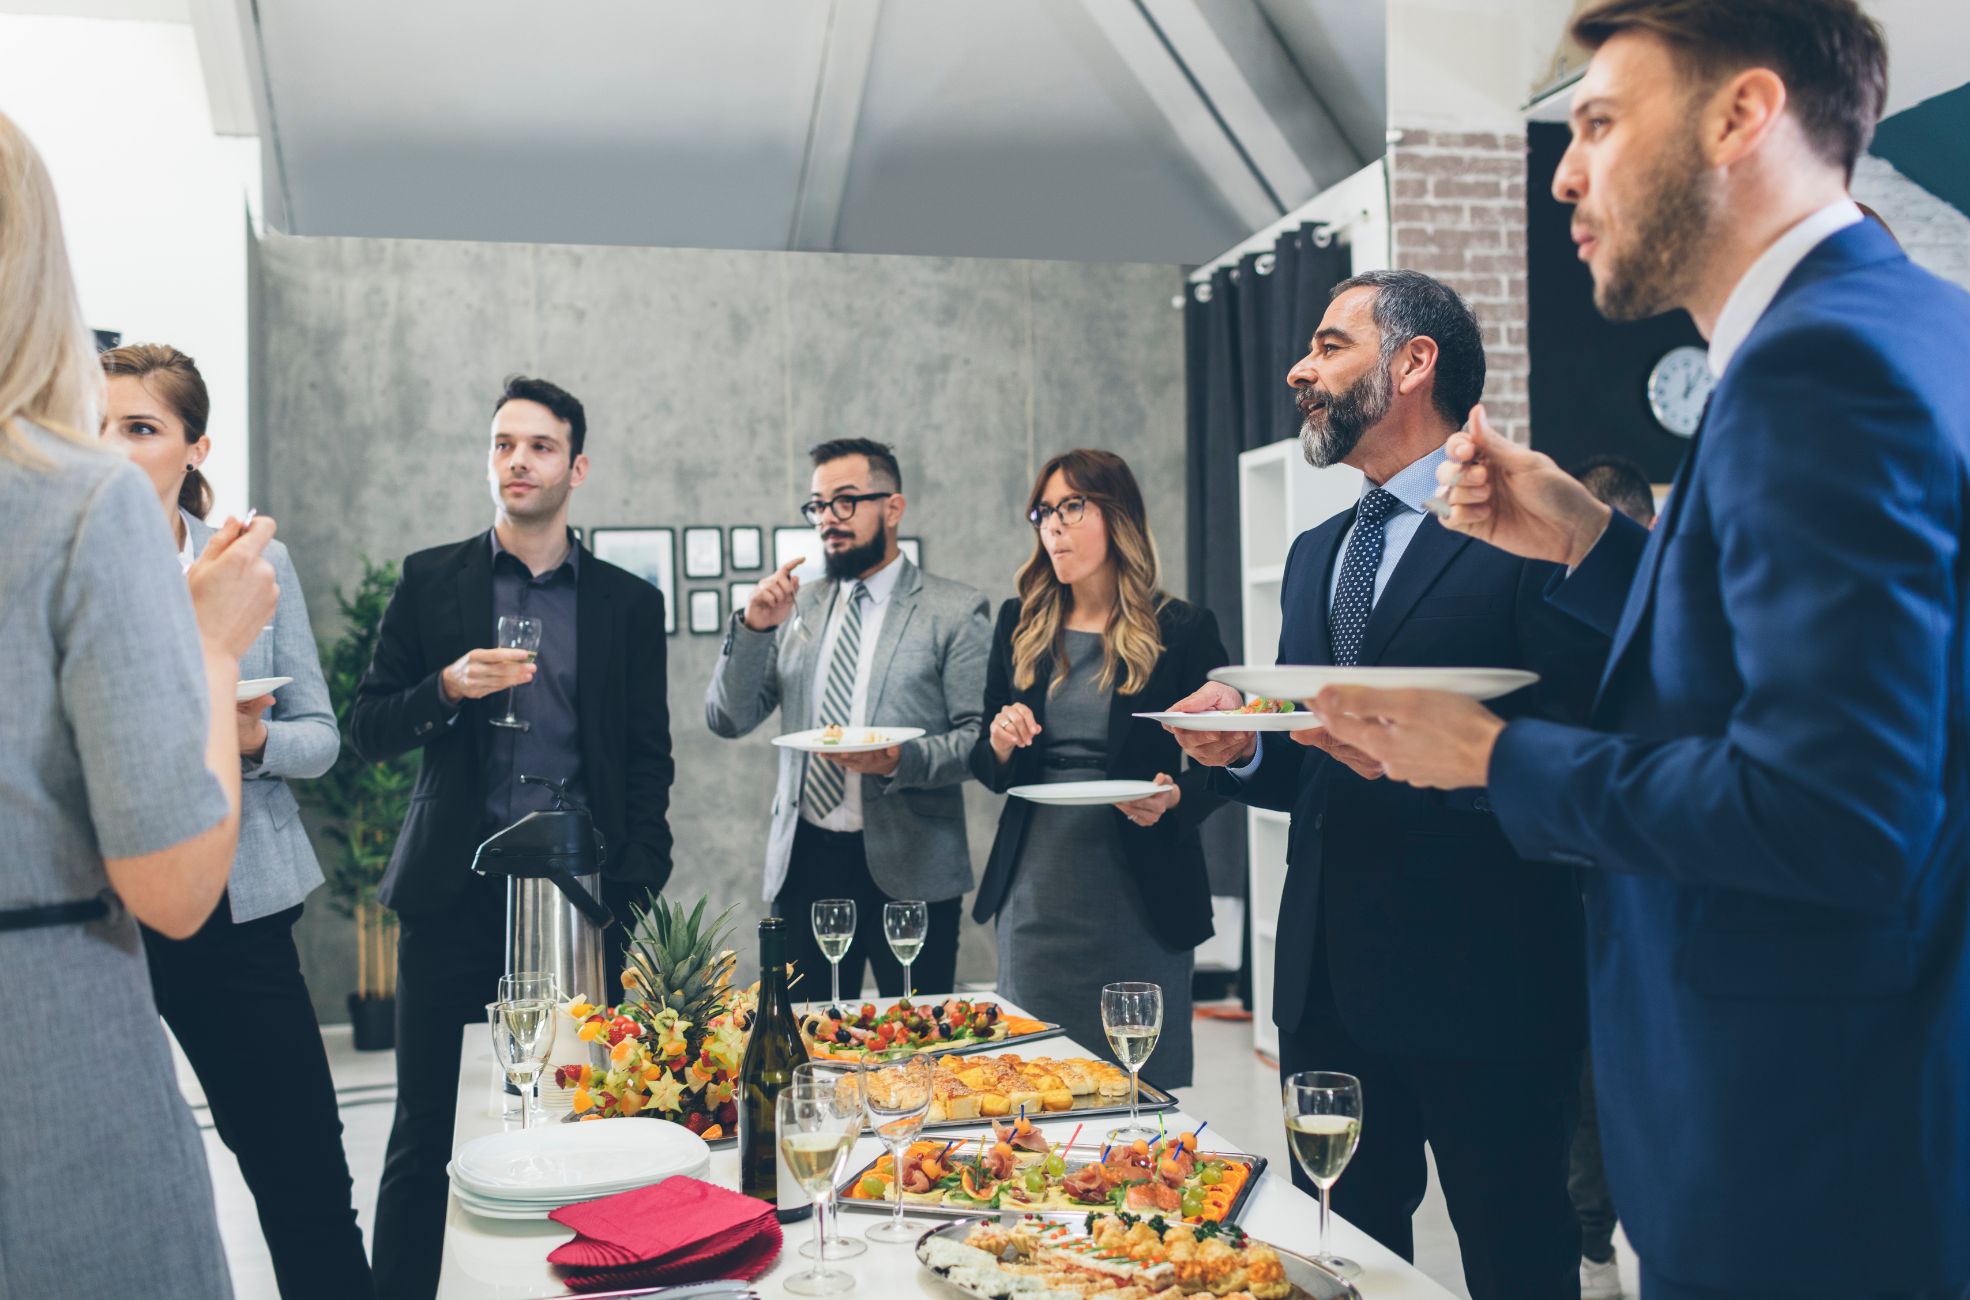 Stock Photo of A Networking Event